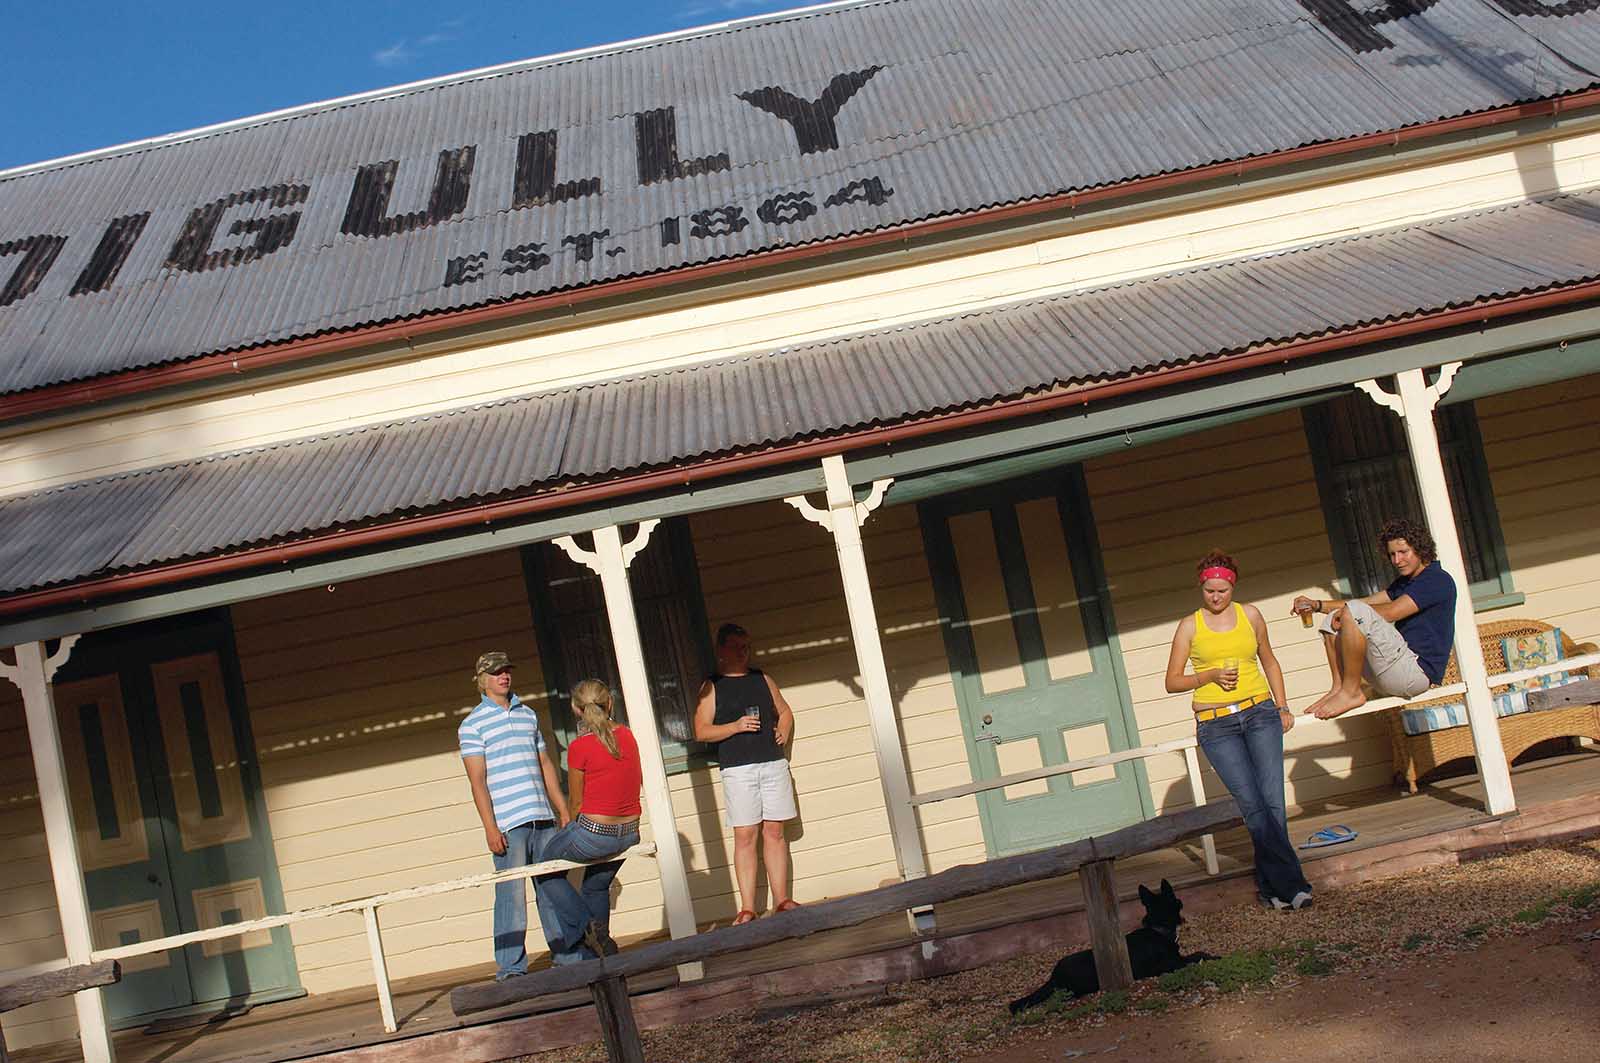 Mega steaks are legendary at the Nindigully Pub, Queensland | Epic outback guide